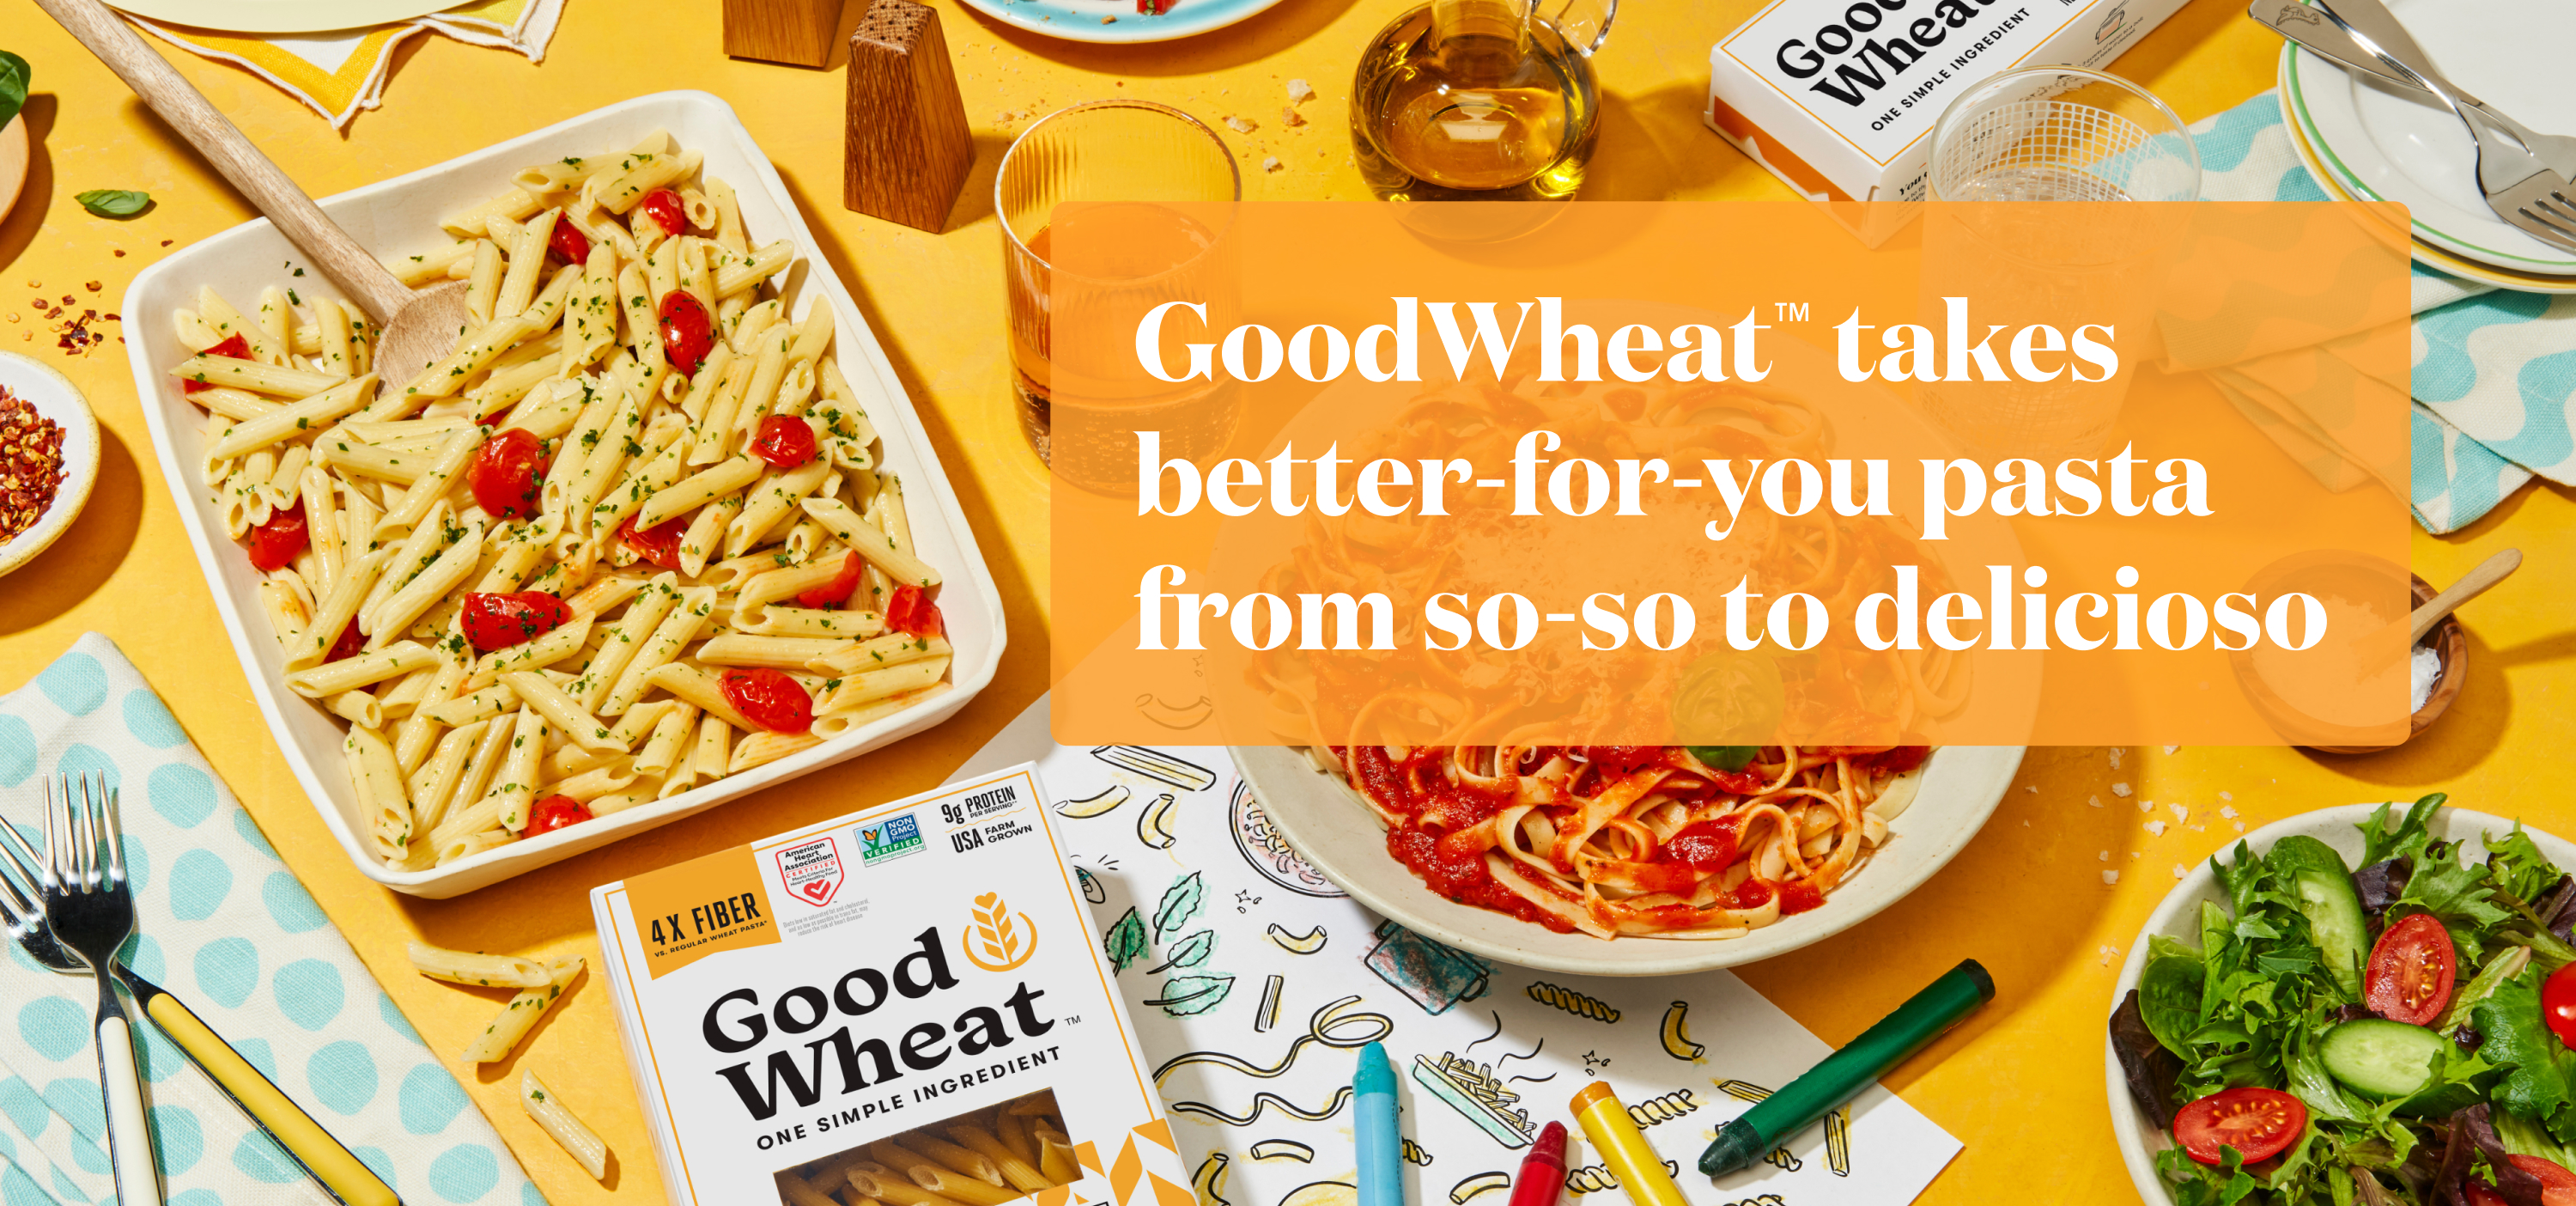 GoodWheat takes better-for-you pasta from so-so to delicioso